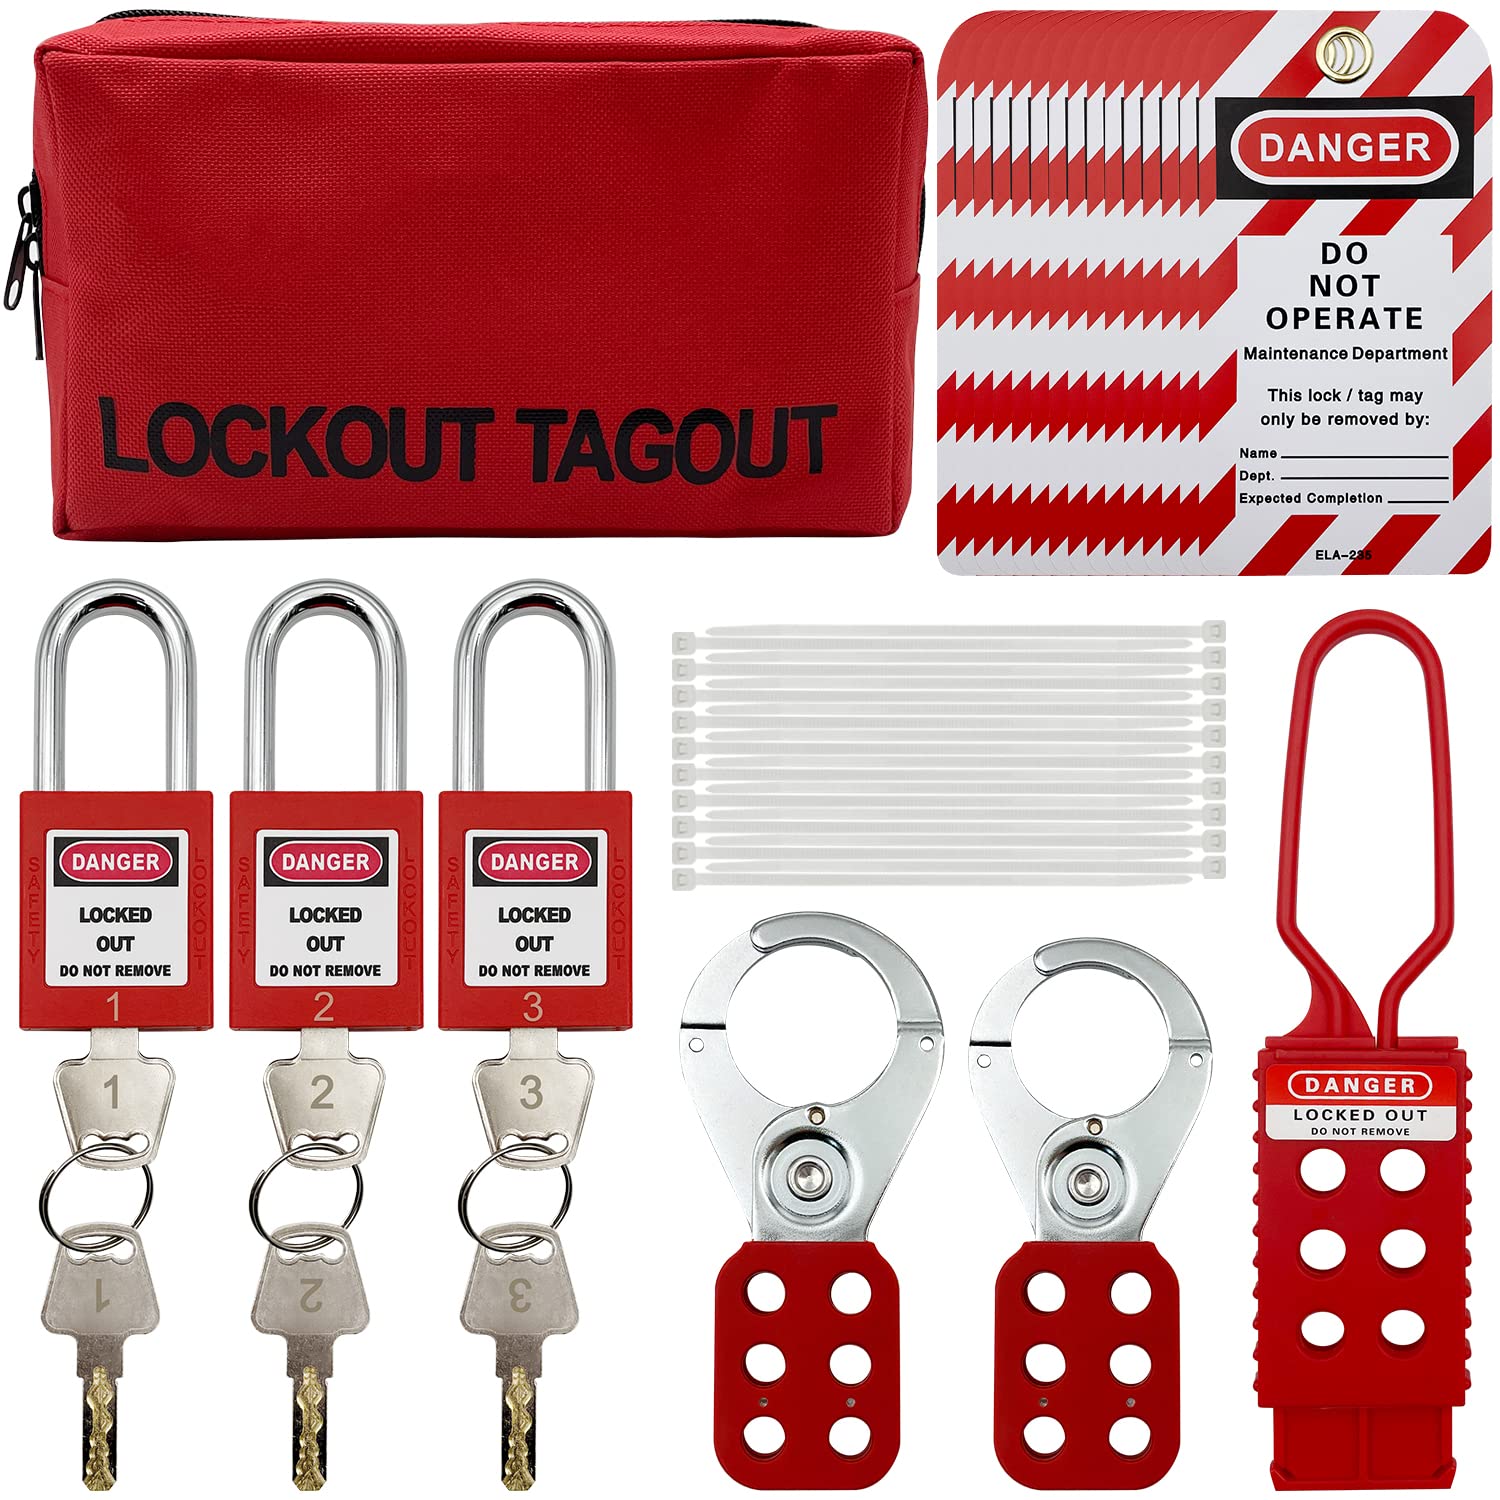 SAFBY Lockout Tagout Kit Electrical Loto - Group Lockout Hasps, Lockout Tags, Safety Padlocks With Number, Nylon Ties With Pocket Bag(